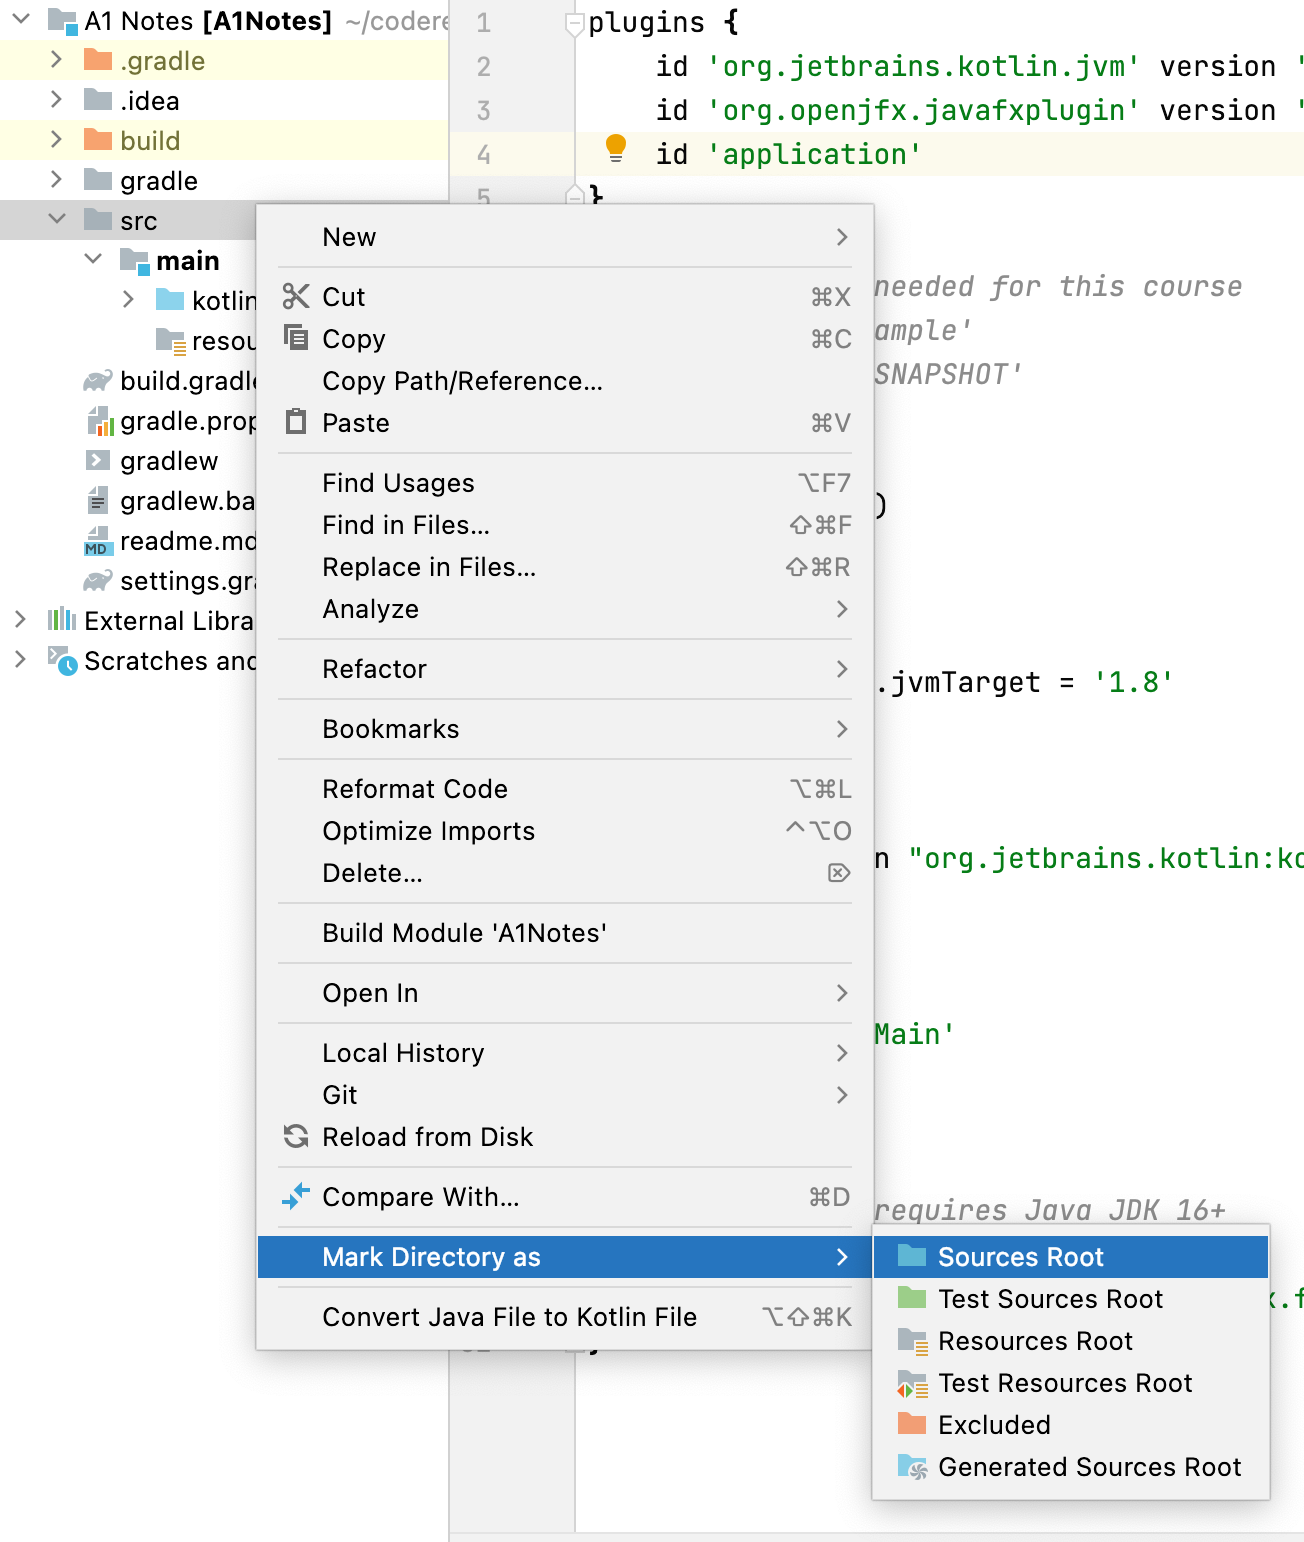 You need to set source-root for IntelliJ to locate source files